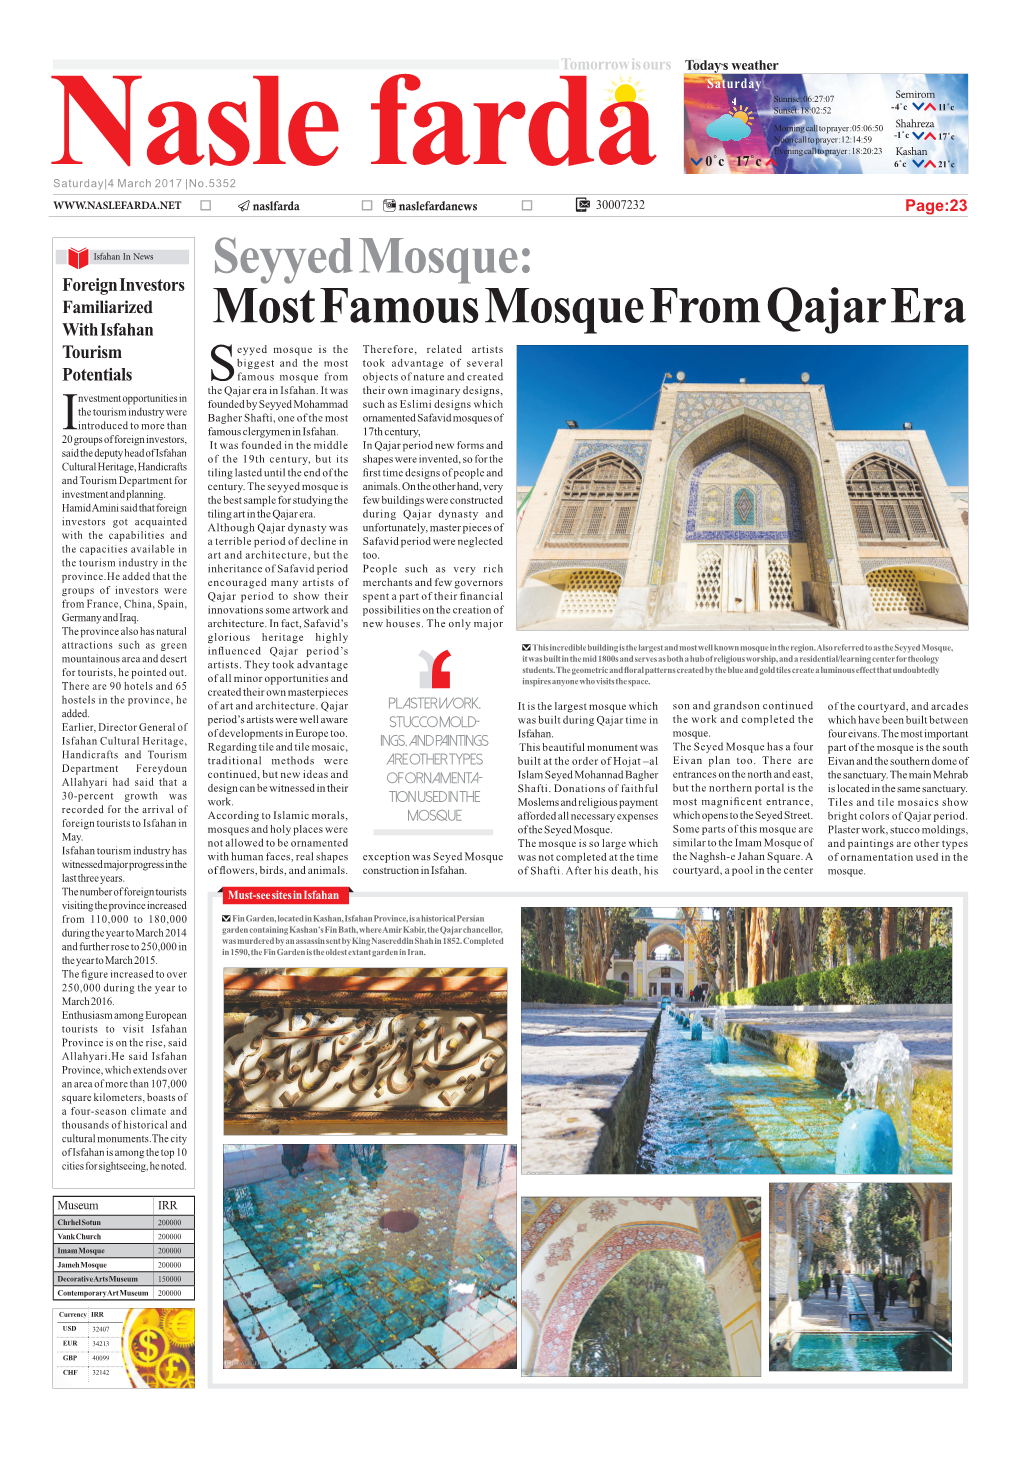 Seyyed Mosque: Most Famous Mosque from Qajar